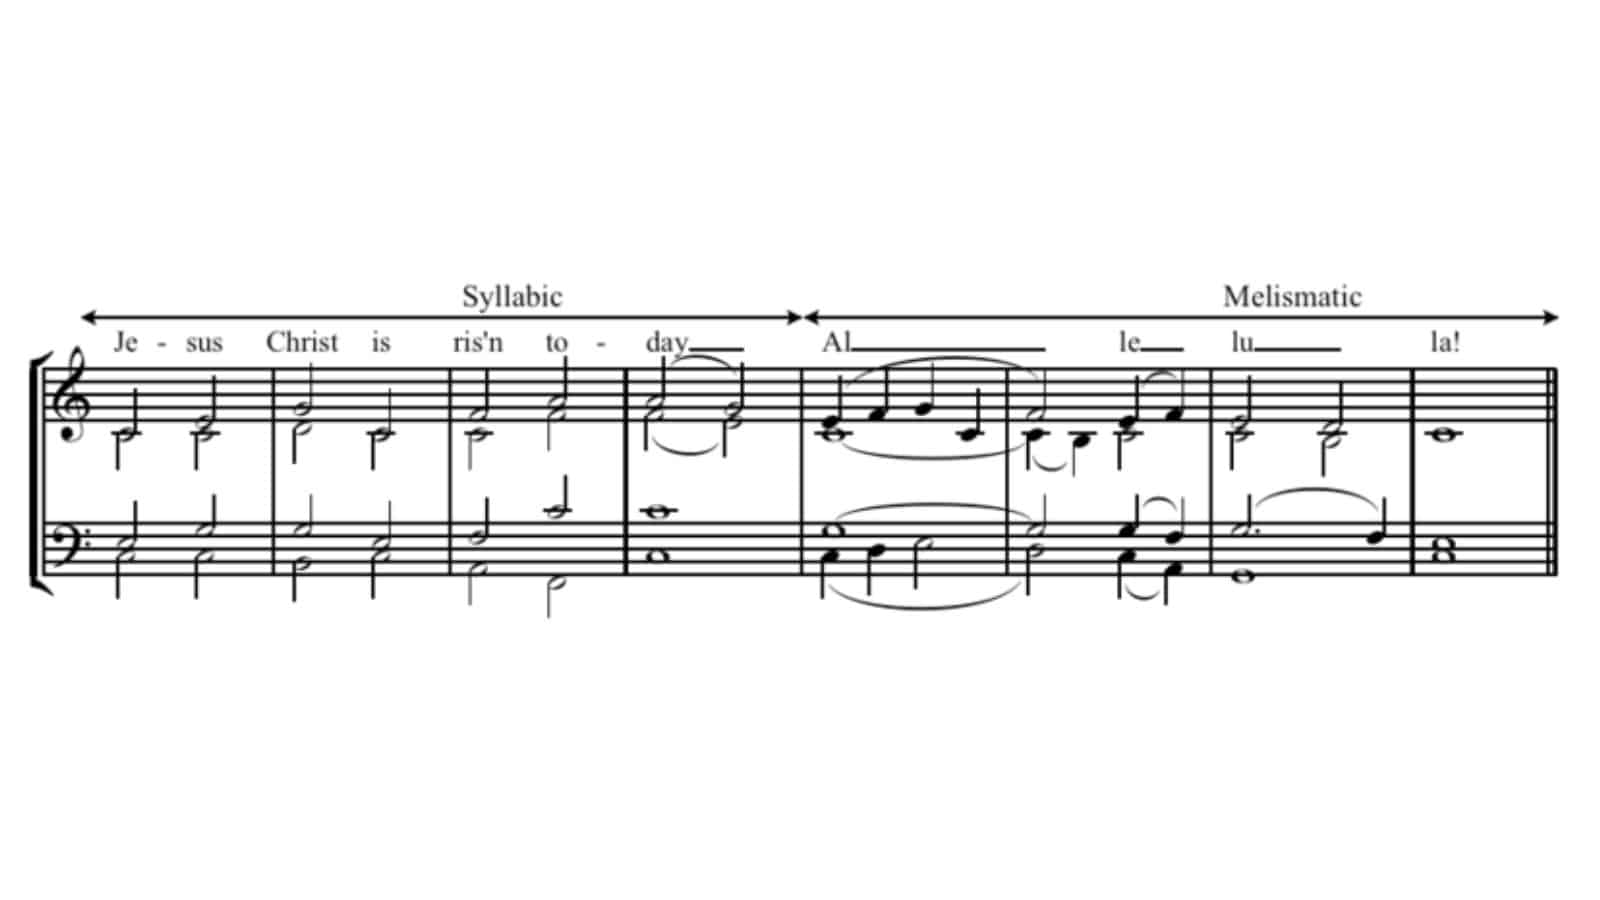 Example of syllabic and melismatic text setting for singers